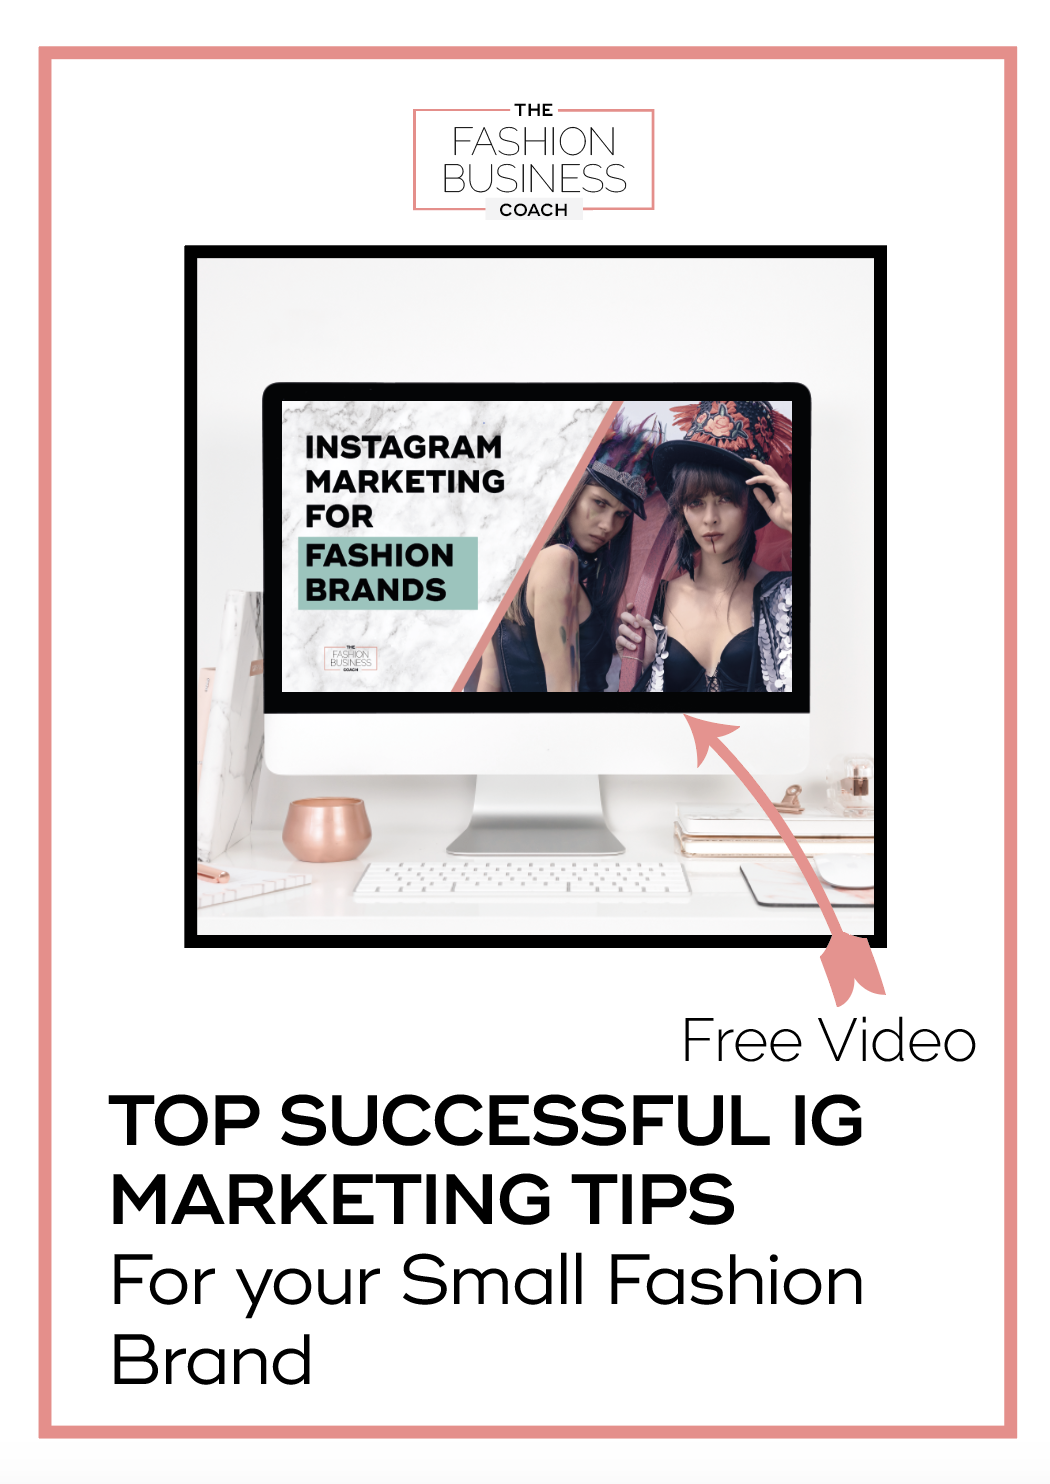 Top Successful IG Marketing Tips for your Small Fashion Brand 3.png